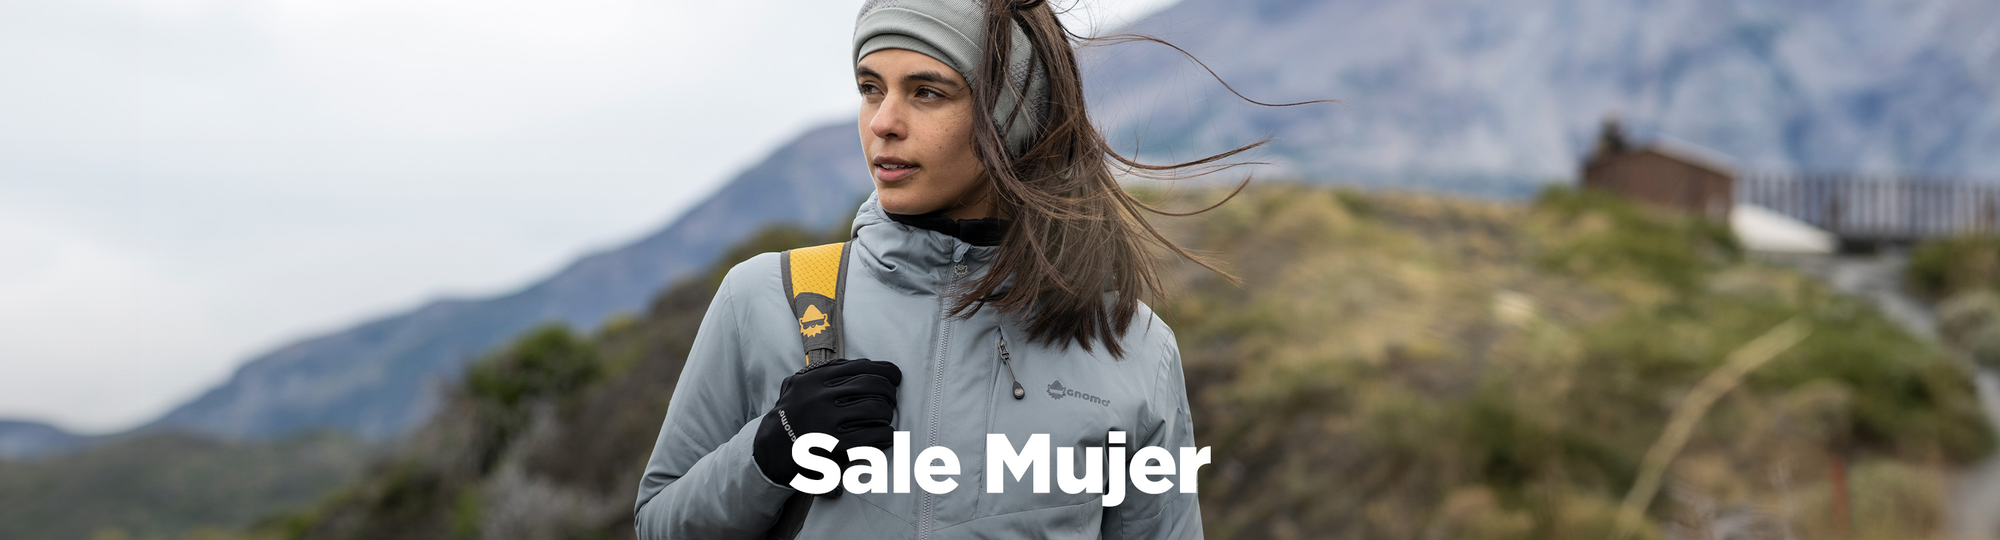 Sale Mujer